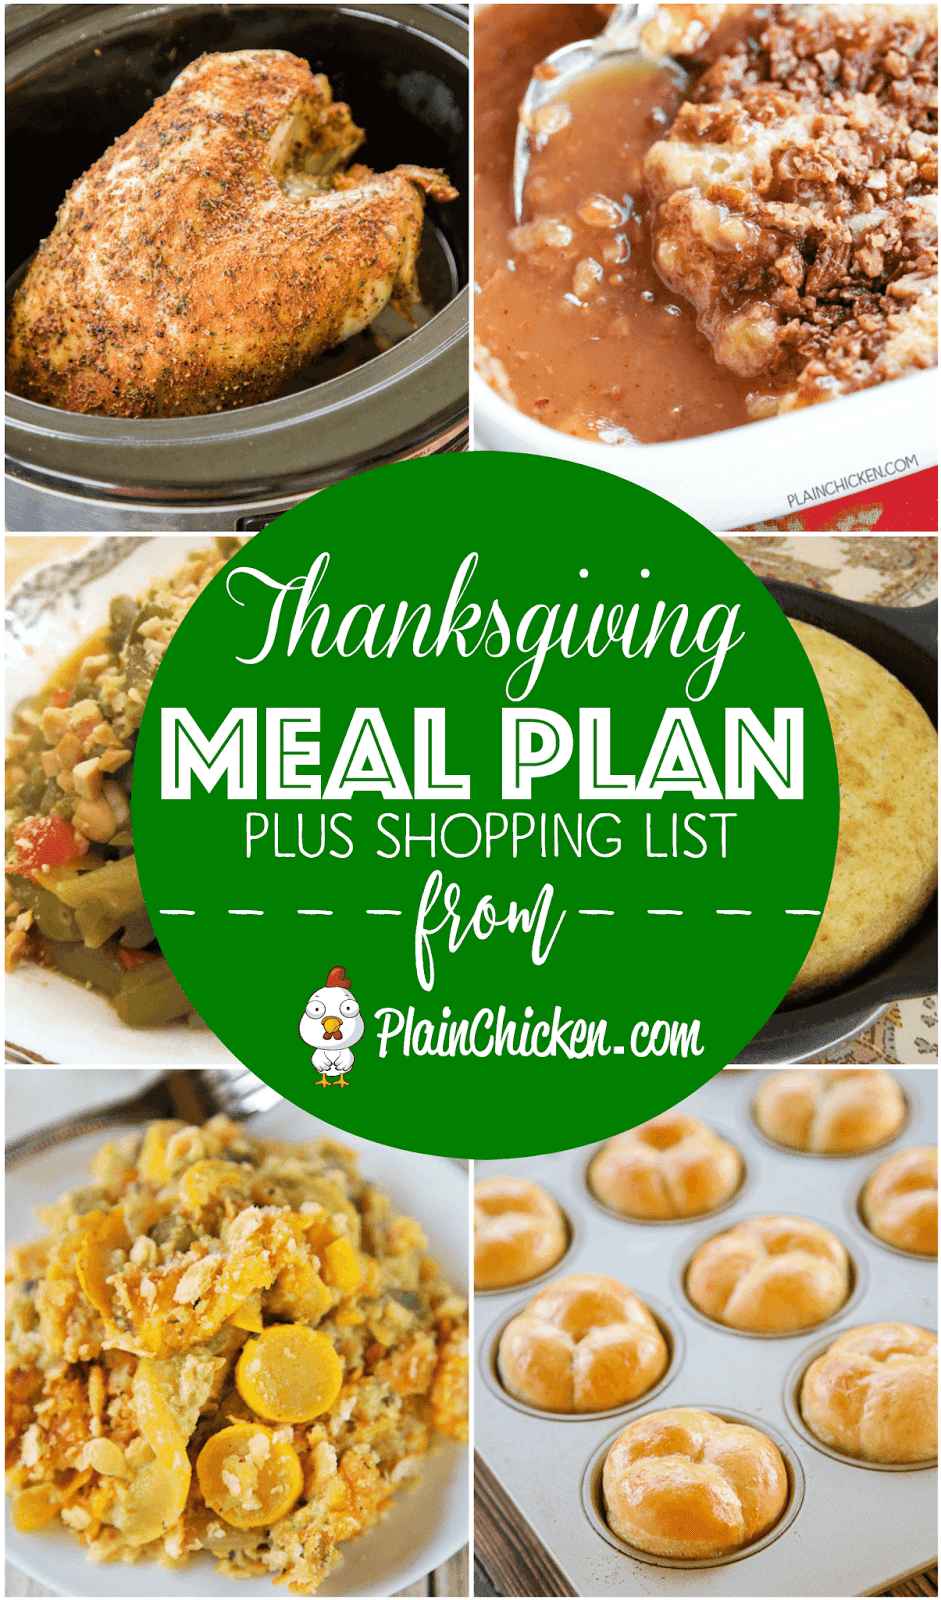 Thanksgiving Meal Plan and Shopping List - get recipes, meal plan and a shopping list to make your holiday meal STRESS-FREE! Turkey, dressing, sides, bread, dessert. When to make what so your holiday is STRESS-FREE!! #thanksgiving #thanksgivingrecipes #mealplanning